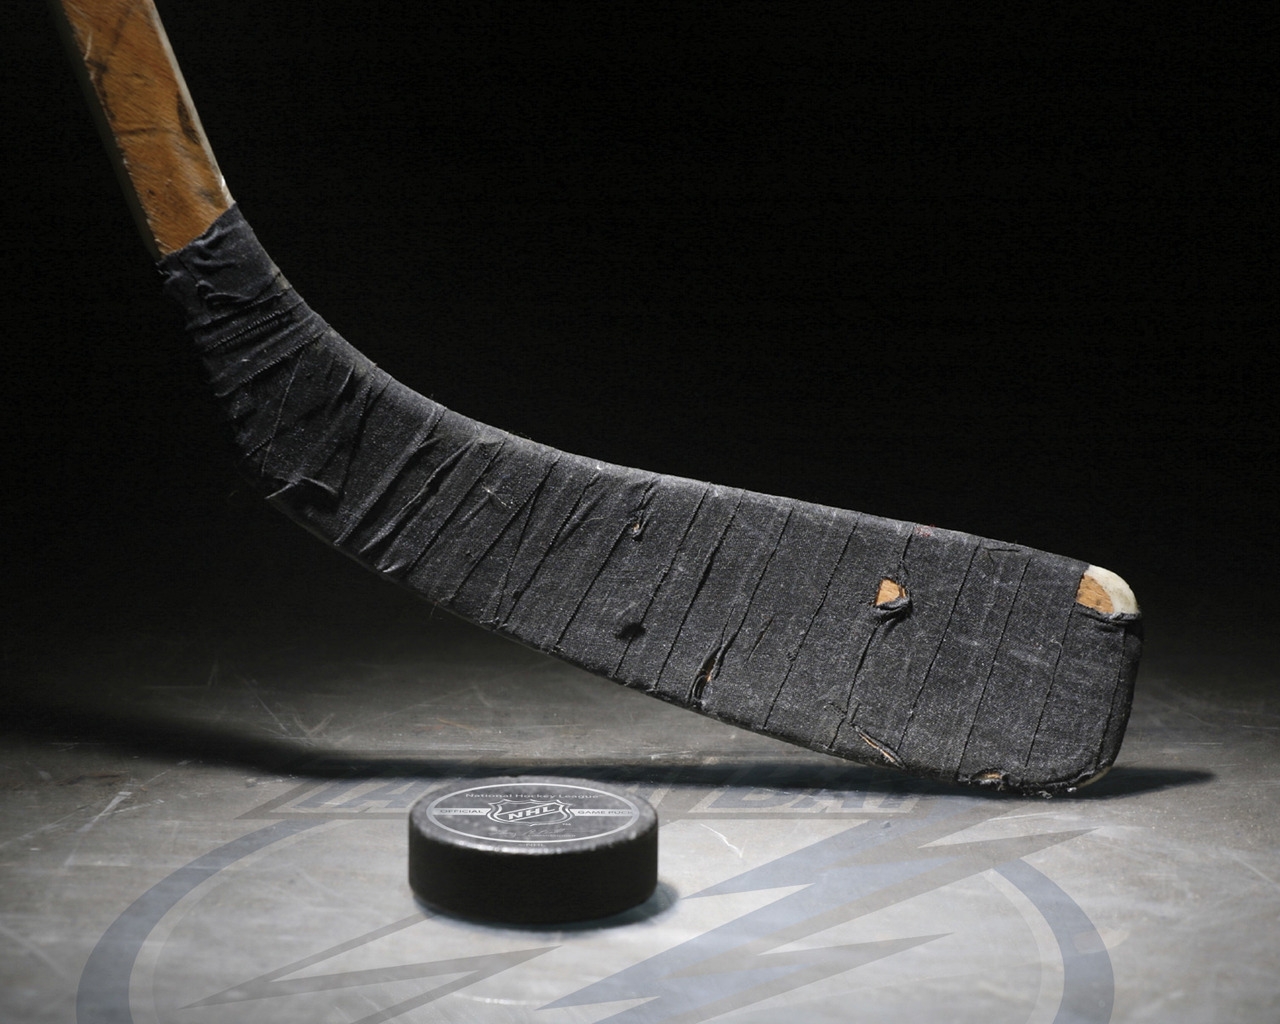 Hockey Puck for 1280 x 1024 resolution